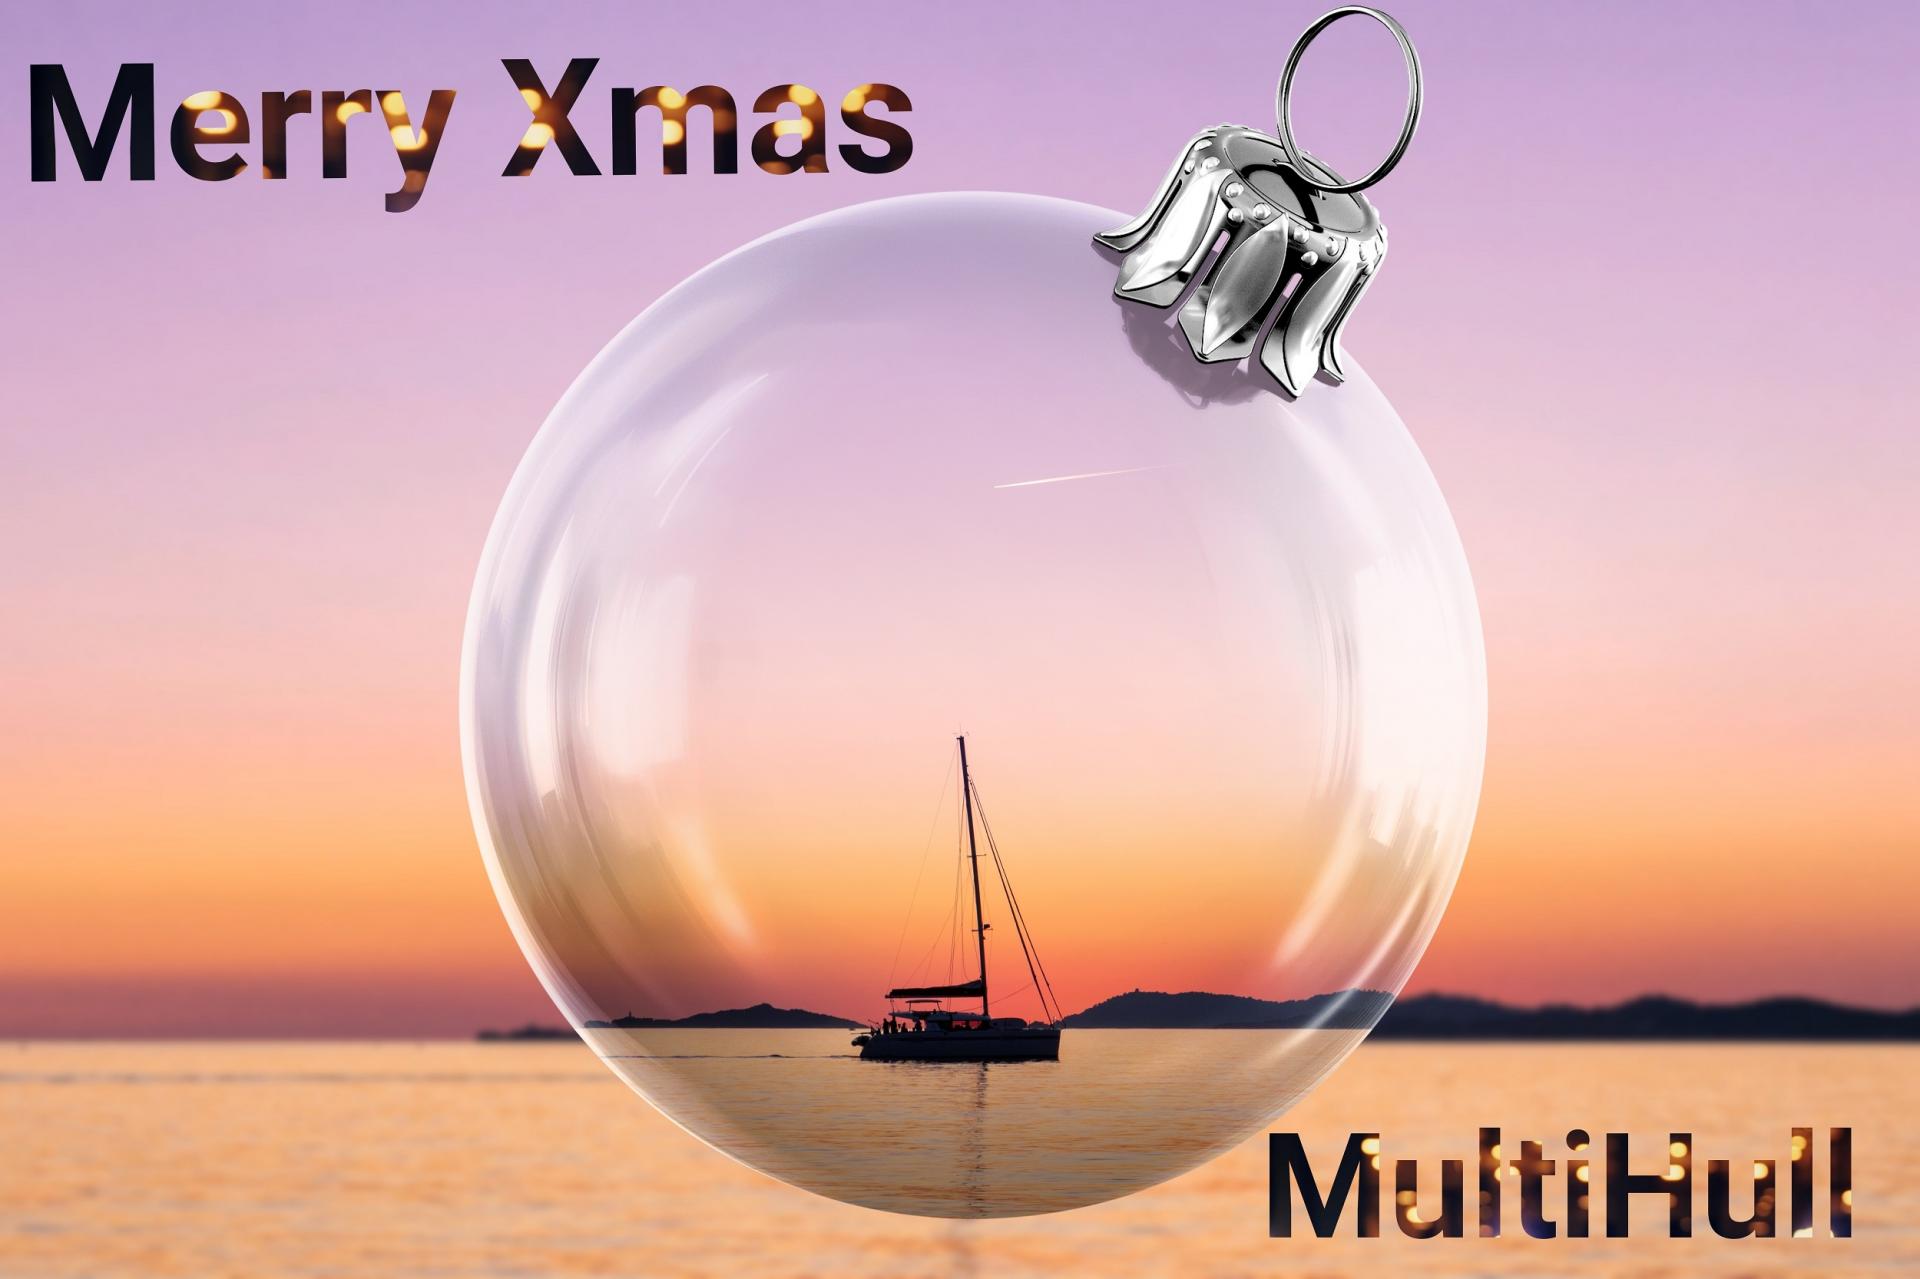 Merry christmas with multihull